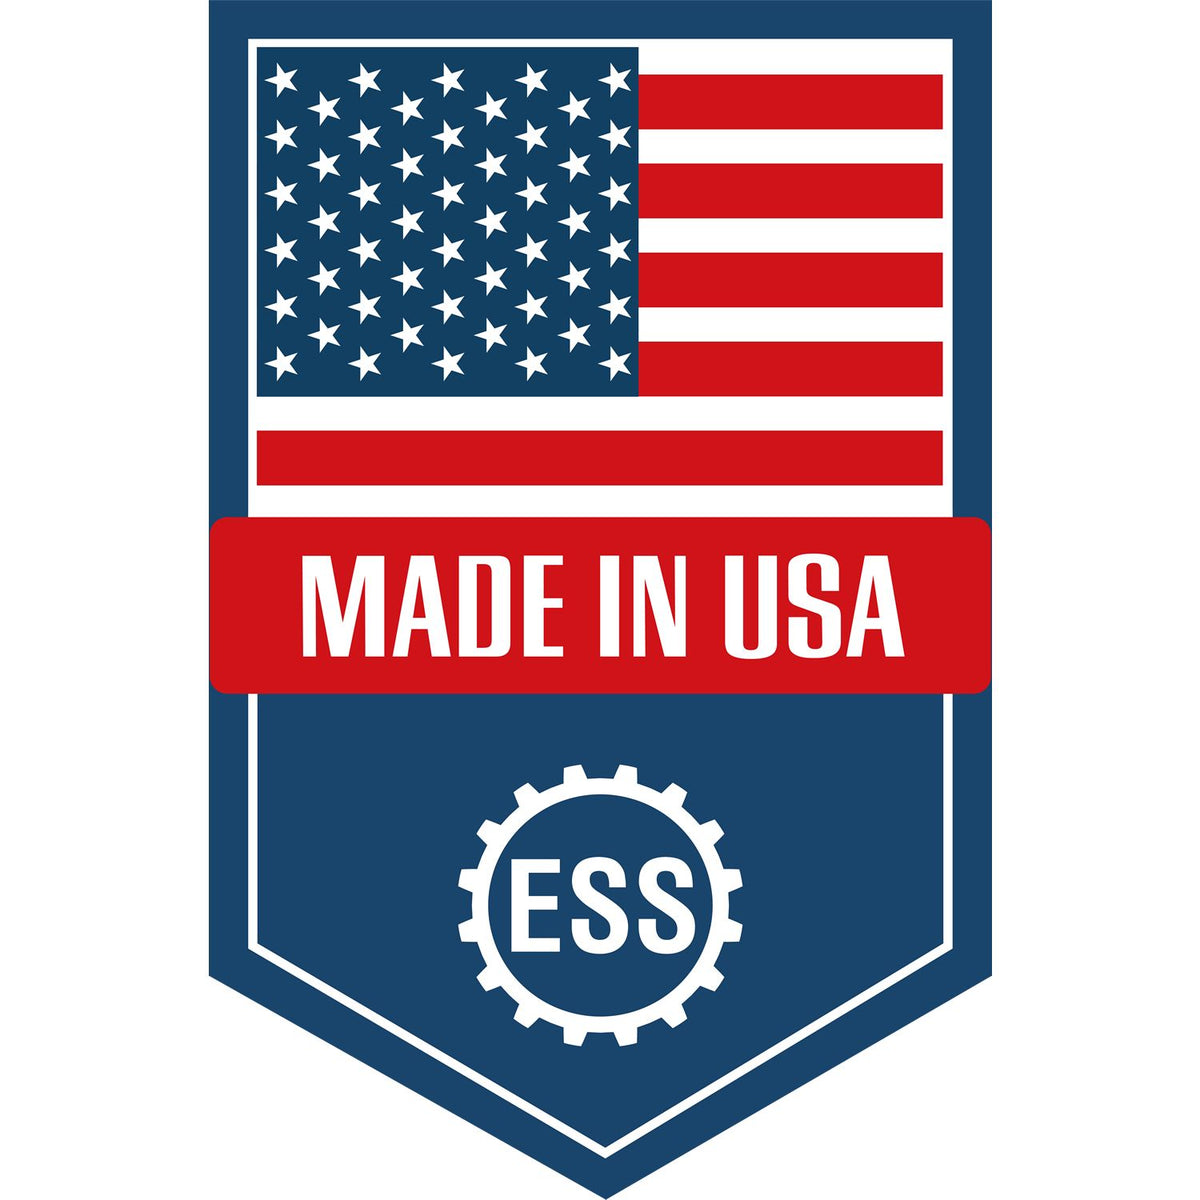 An icon or graphic with an american flag and text reading Made in USA for the New Jersey Landscape Architectural Seal Stamp